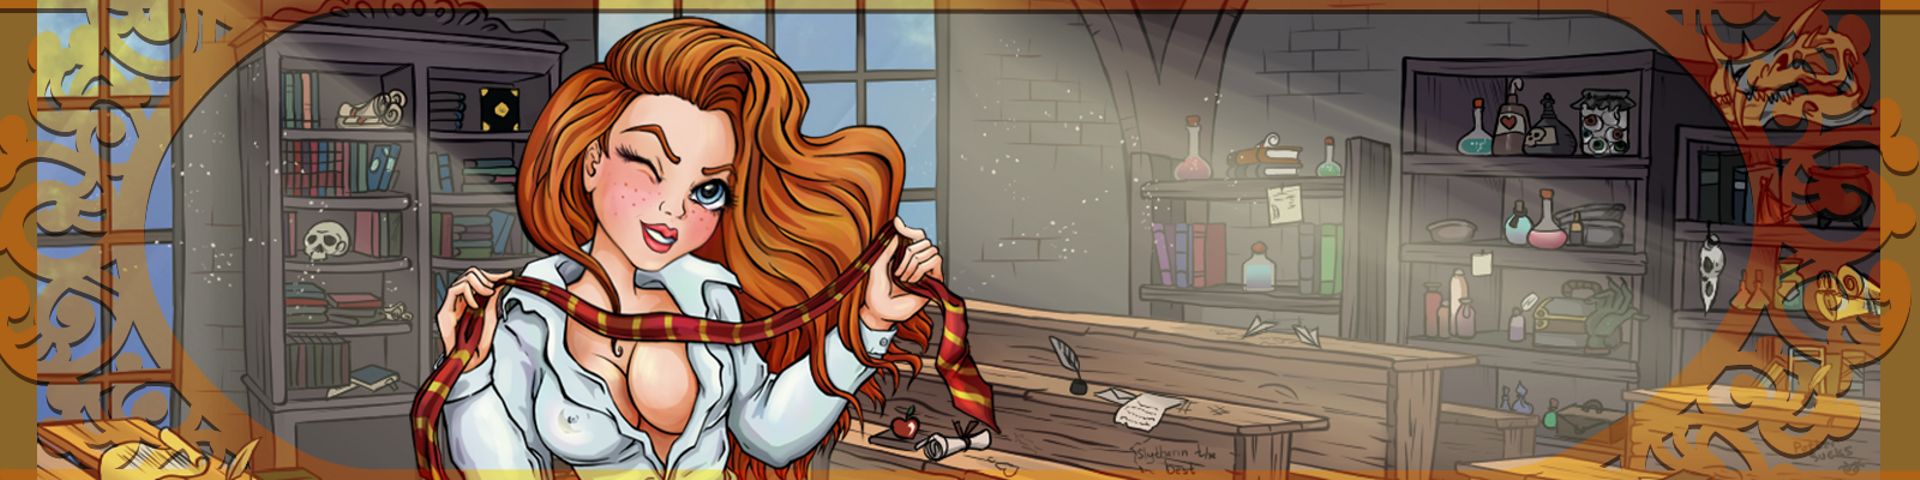 Wands And Witches Apk